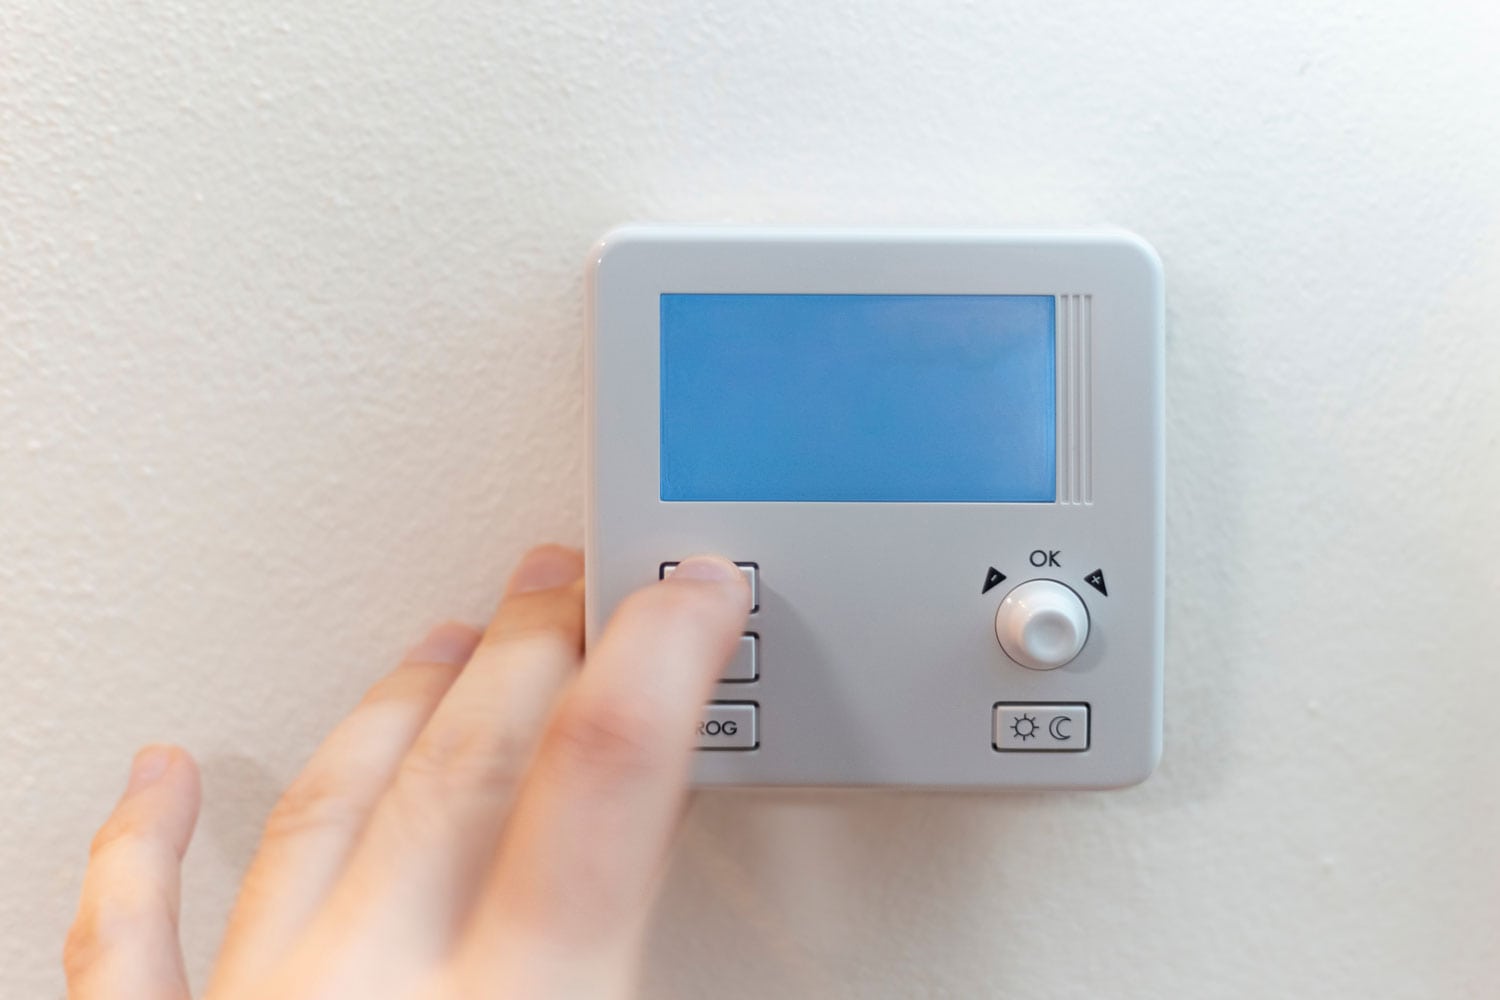 Changing the living room thermostat temperature